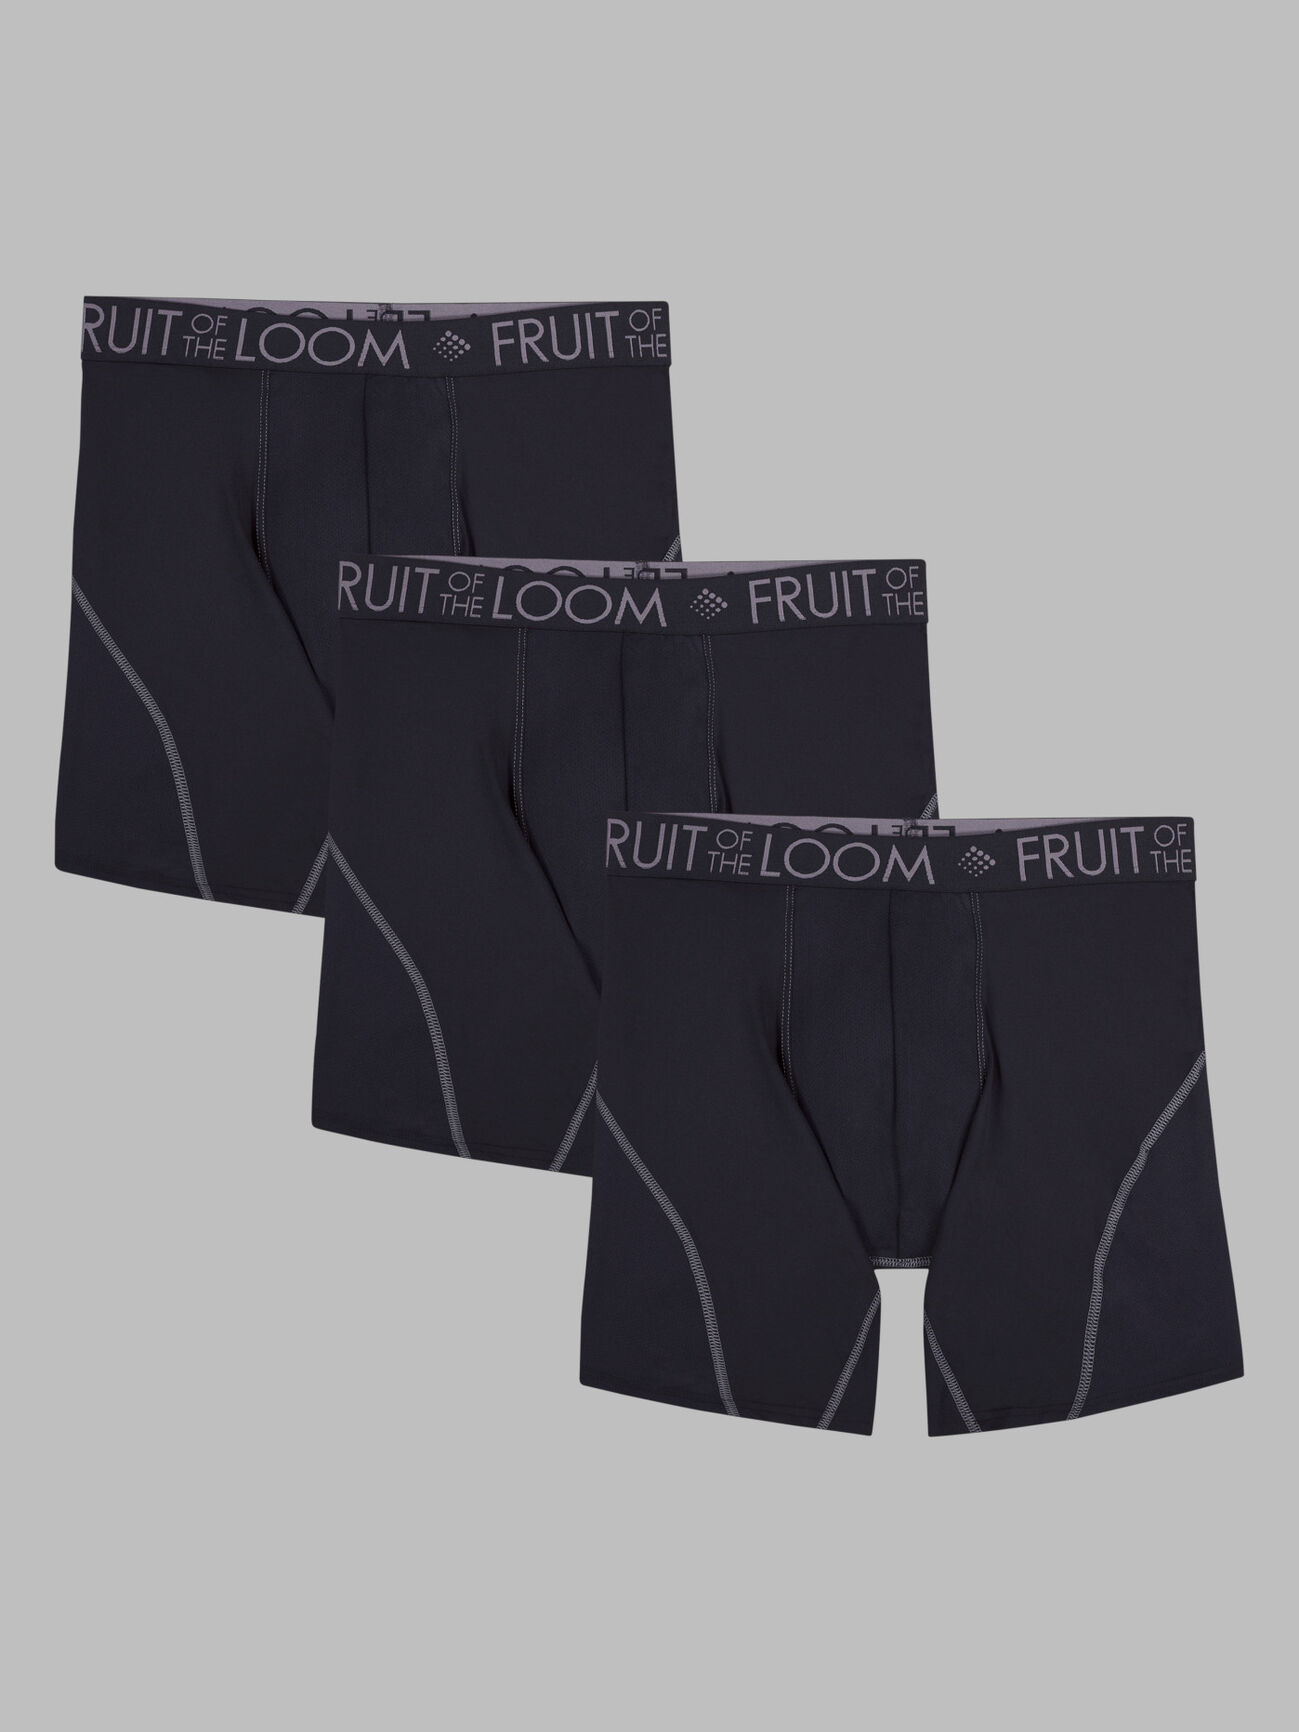 20 Wholesale Fruit Of The Loom Girl's Cotton Stretch Briefs 6 Pack - at 